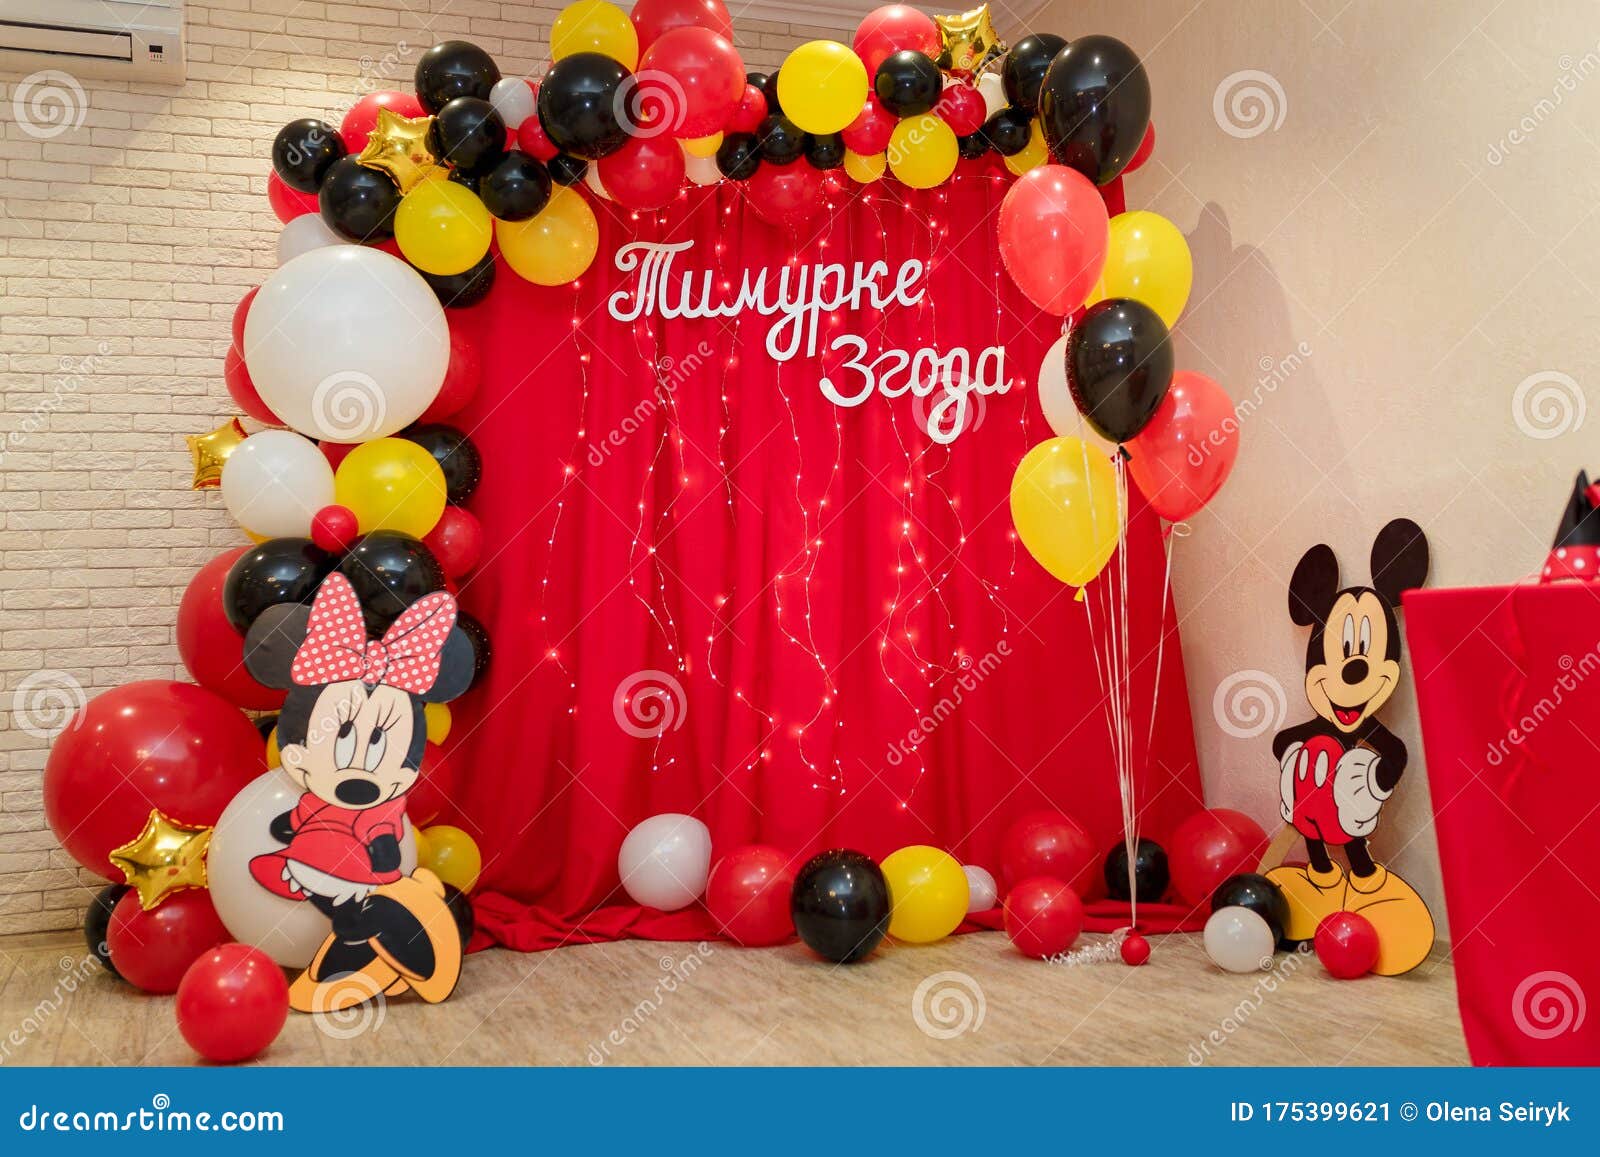 Mickey and Minnie Mouse Party. Decorations with Walt Disney ...